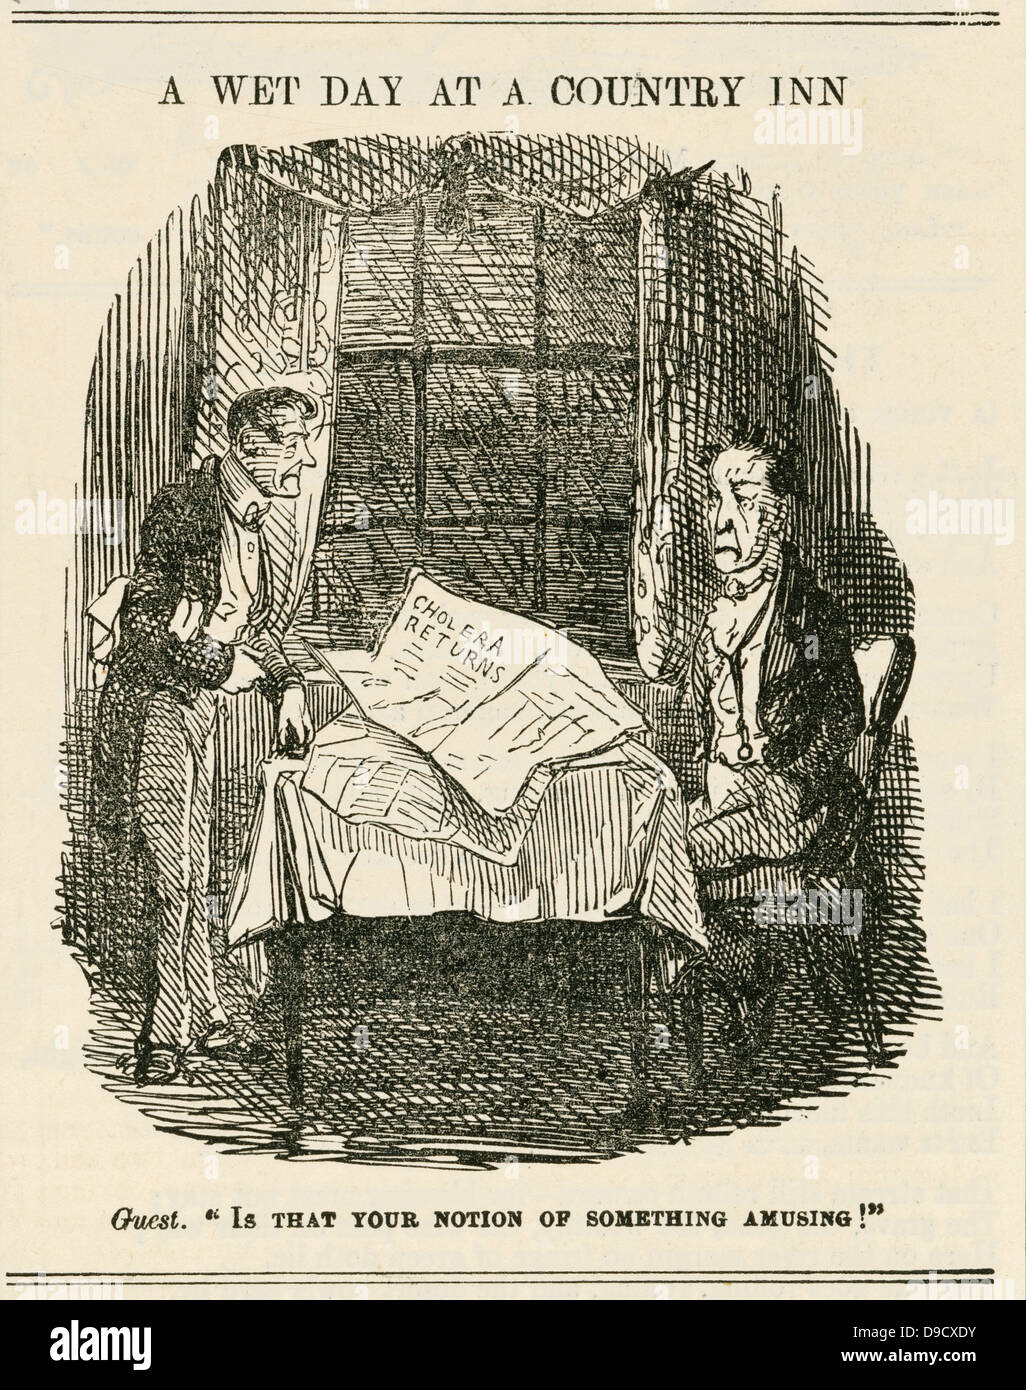 Houseguest is not amused! A wet day in the country made more miserable by news of the return of Cholera to London. Cartoon from Punch, London, 1849. Stock Photo